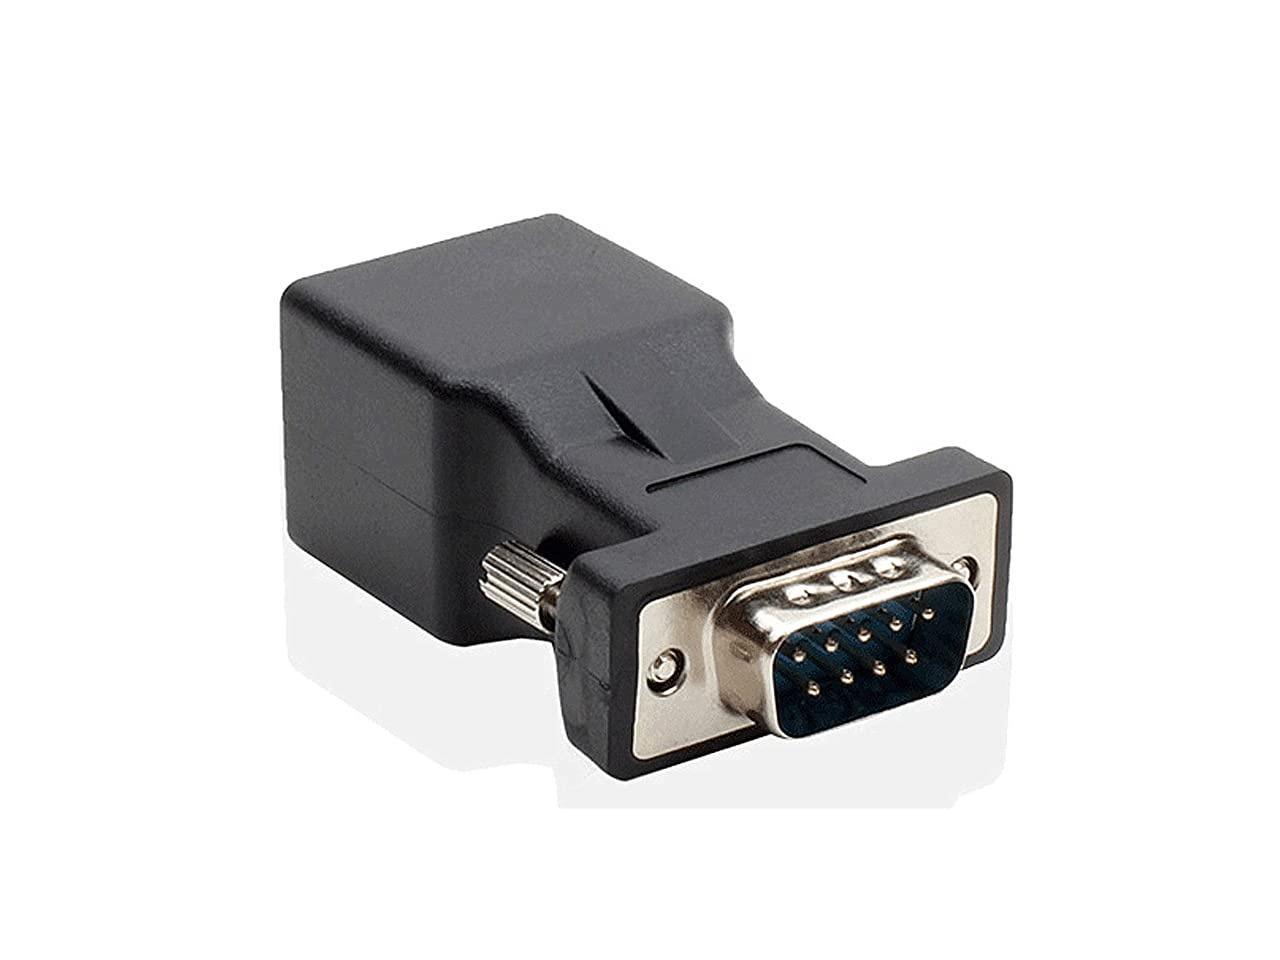 WYMECT DB9 Male to RJ45 Female Adapter DB9 Serial Port Extender to LAN CAT5 CAT6 RJ45 Network Ethernet Cable Adapter 